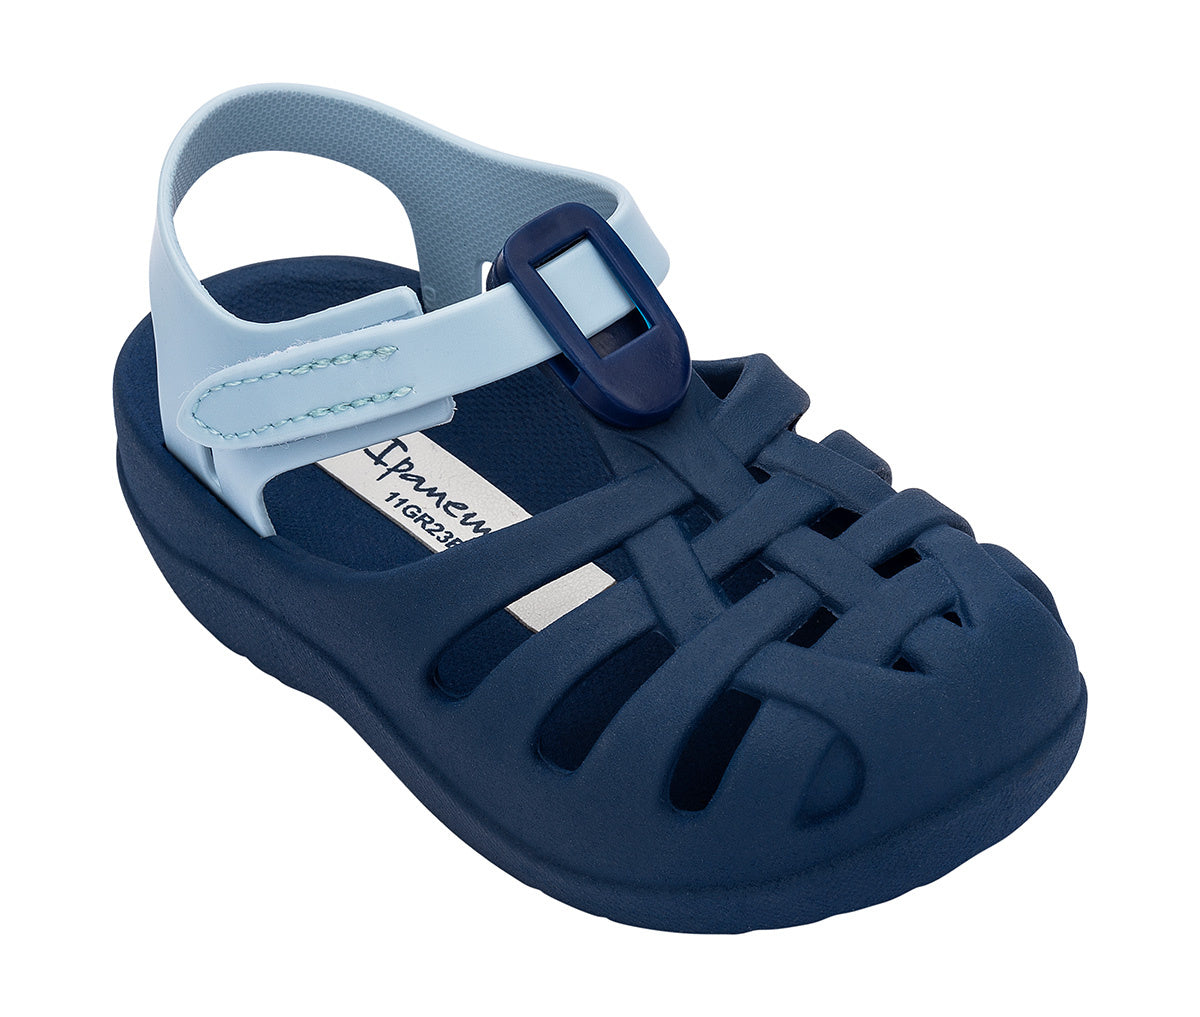 Angled view of a blue Ipanema Summer Basic baby sandal.